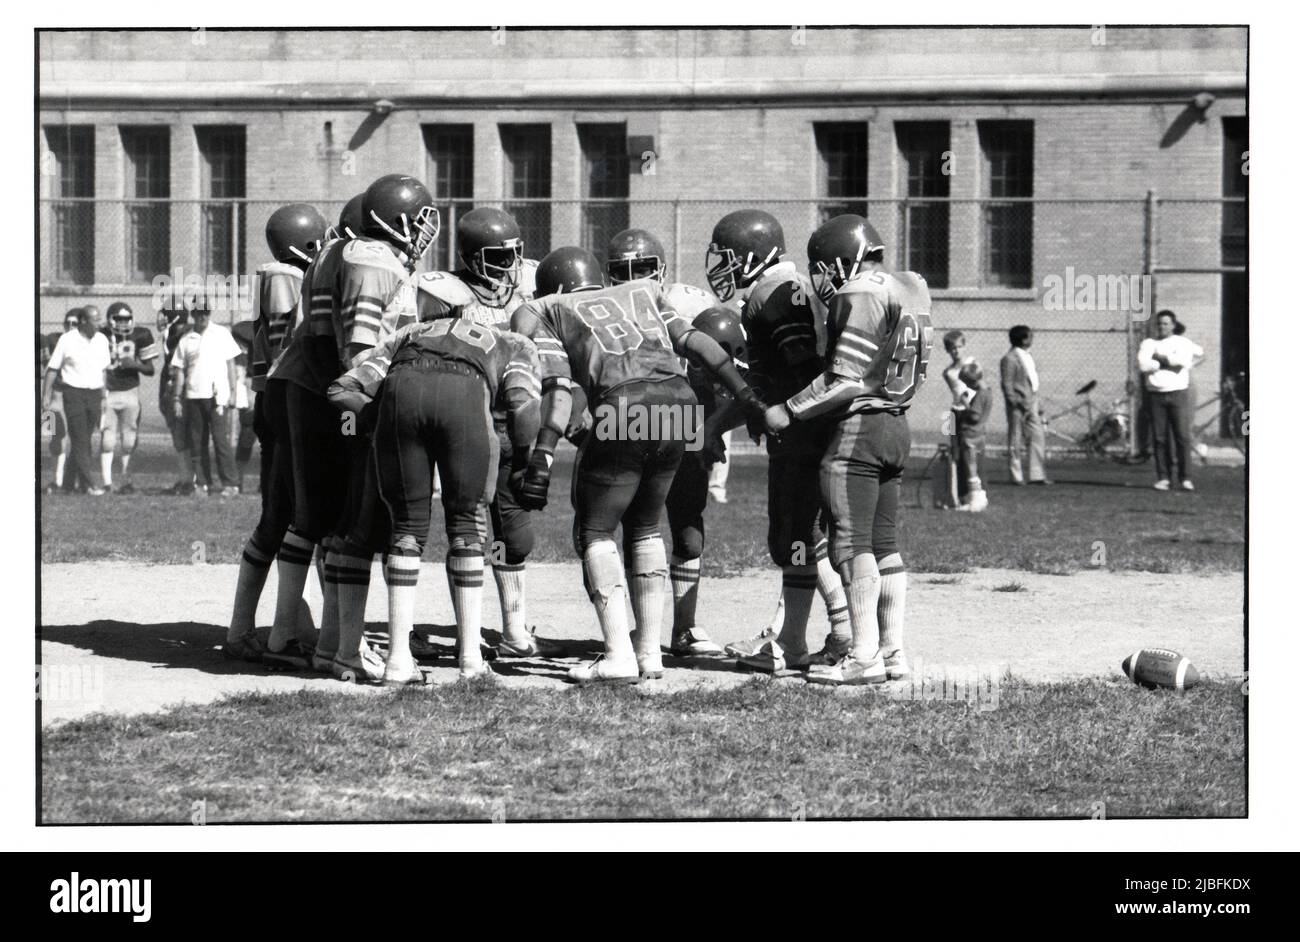 The John Jay High School football team holds hand in their huddle while the next play is being called. in 1983 in Brooklyn, New York. Stock Photo